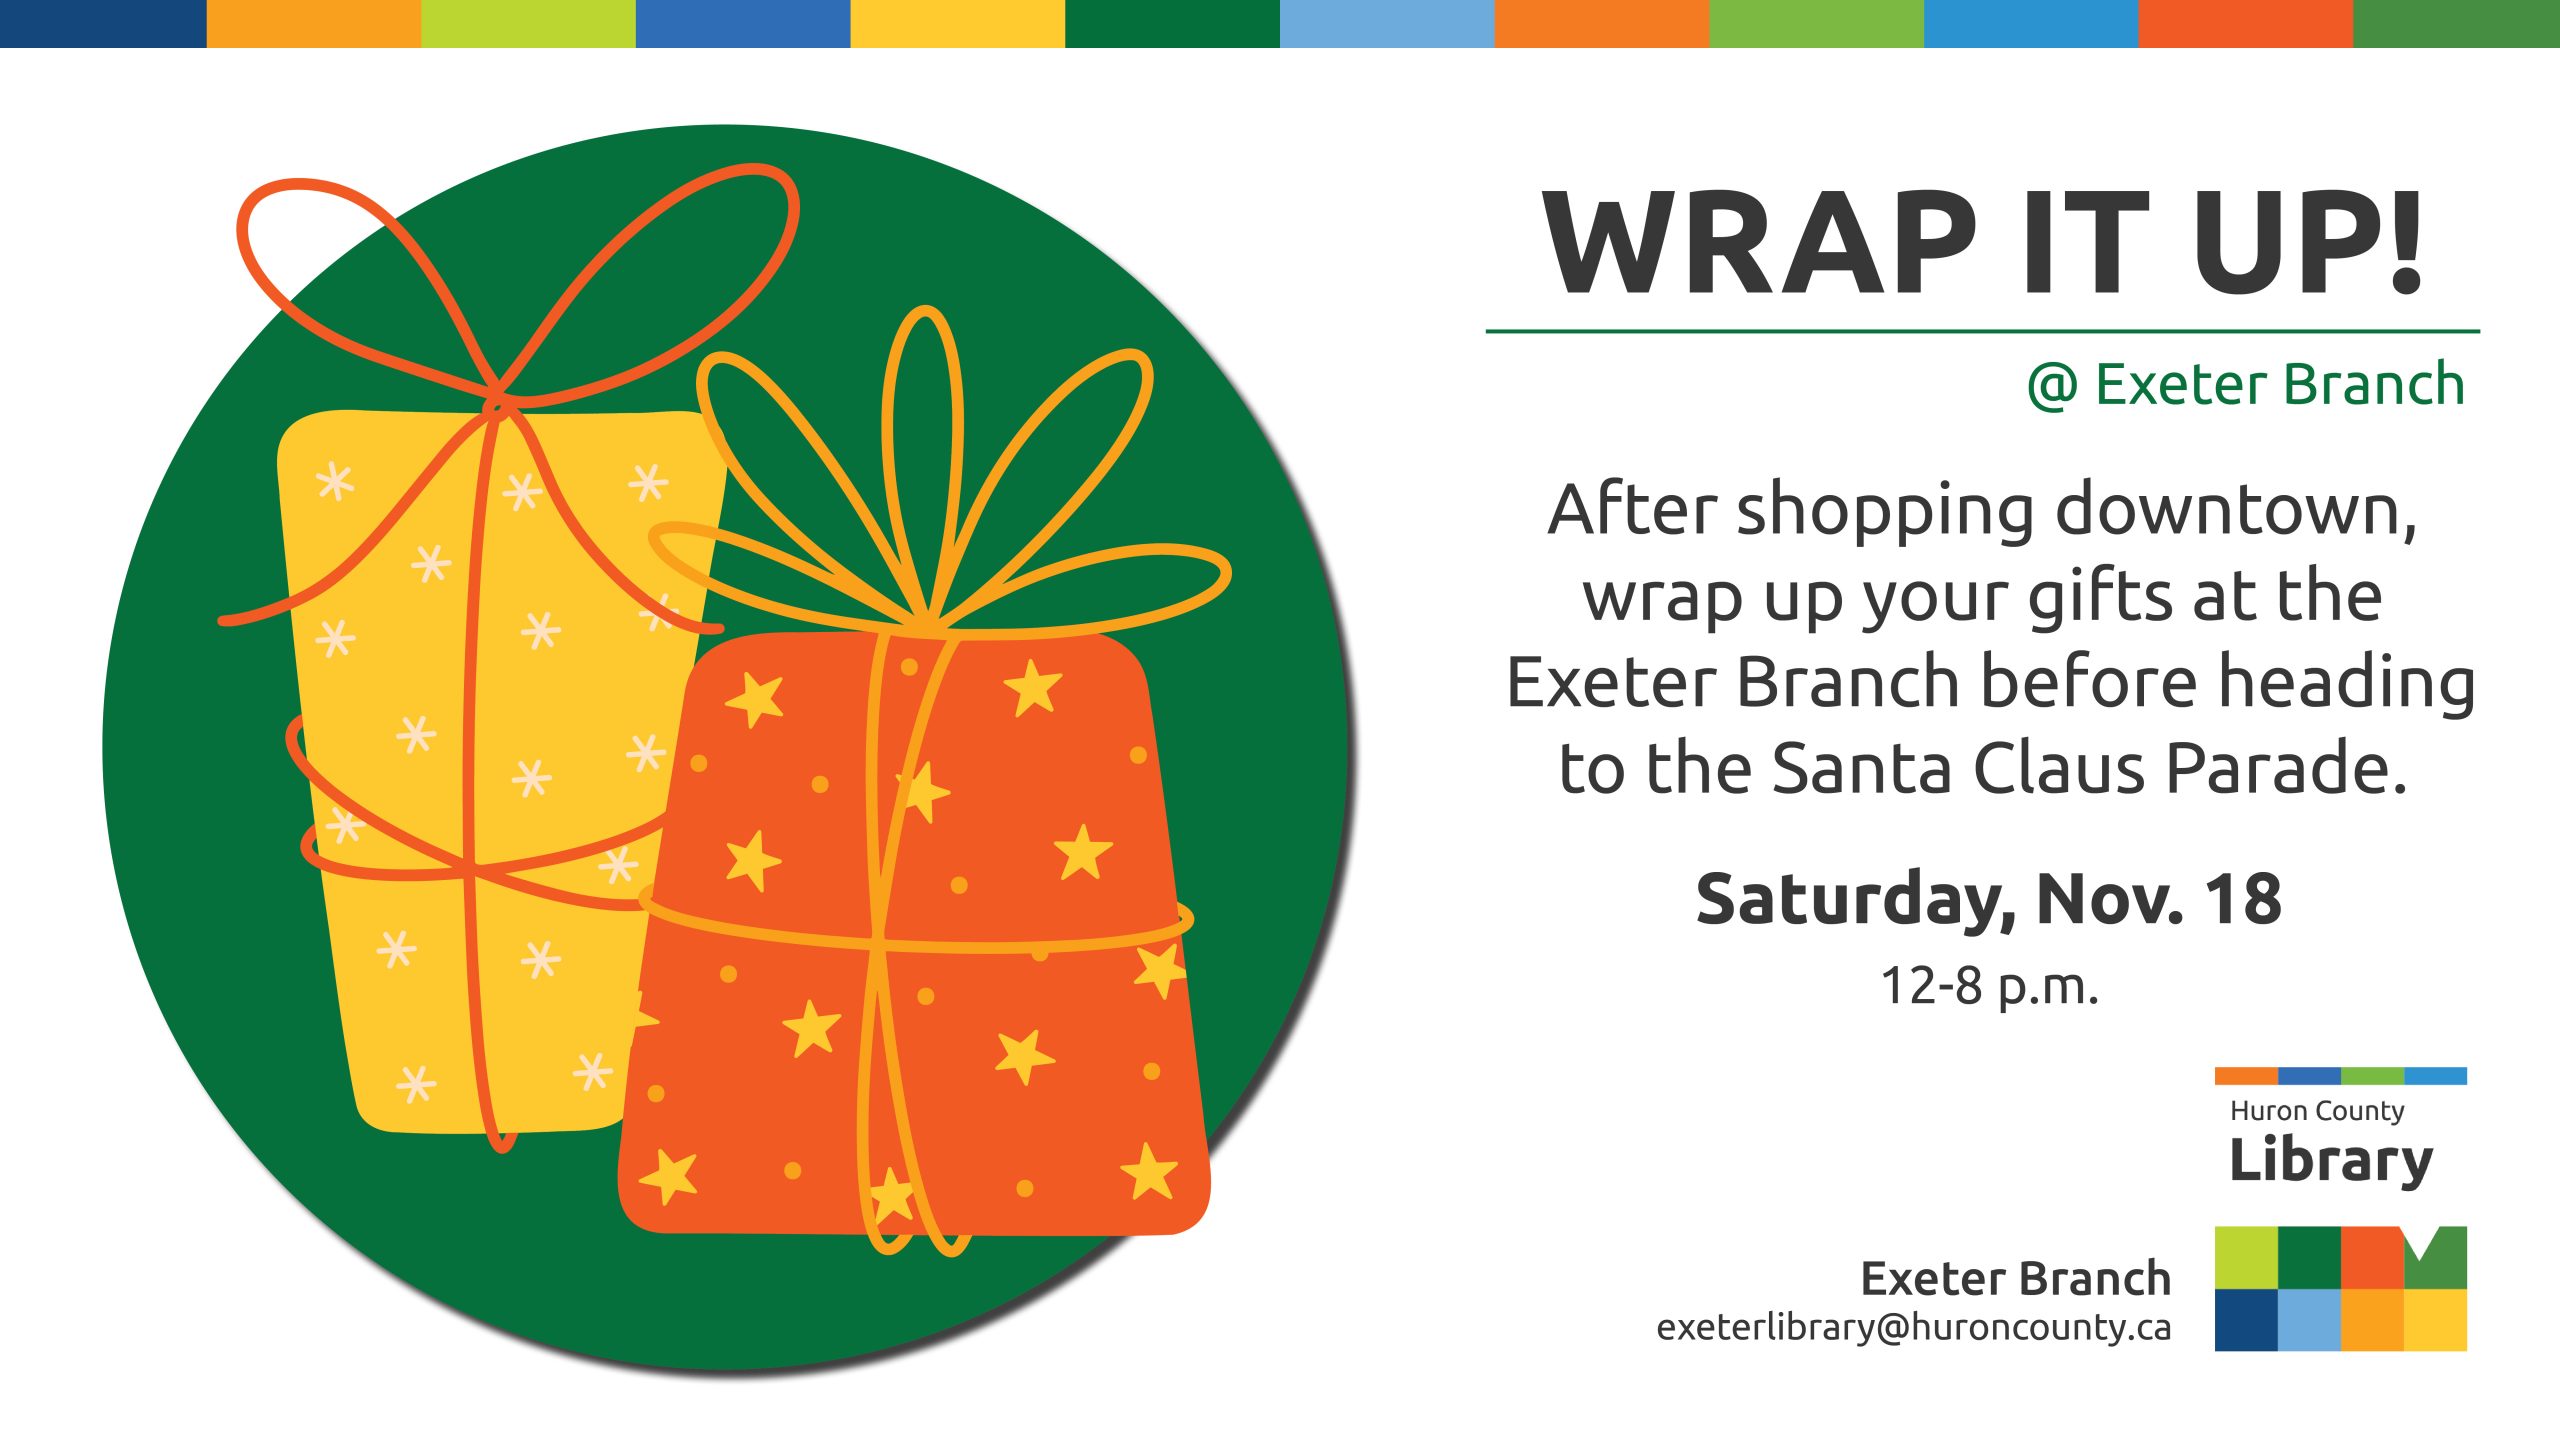 Illustration of wrapped Christmas presents with text promoting Wrap it up at Exeter branch